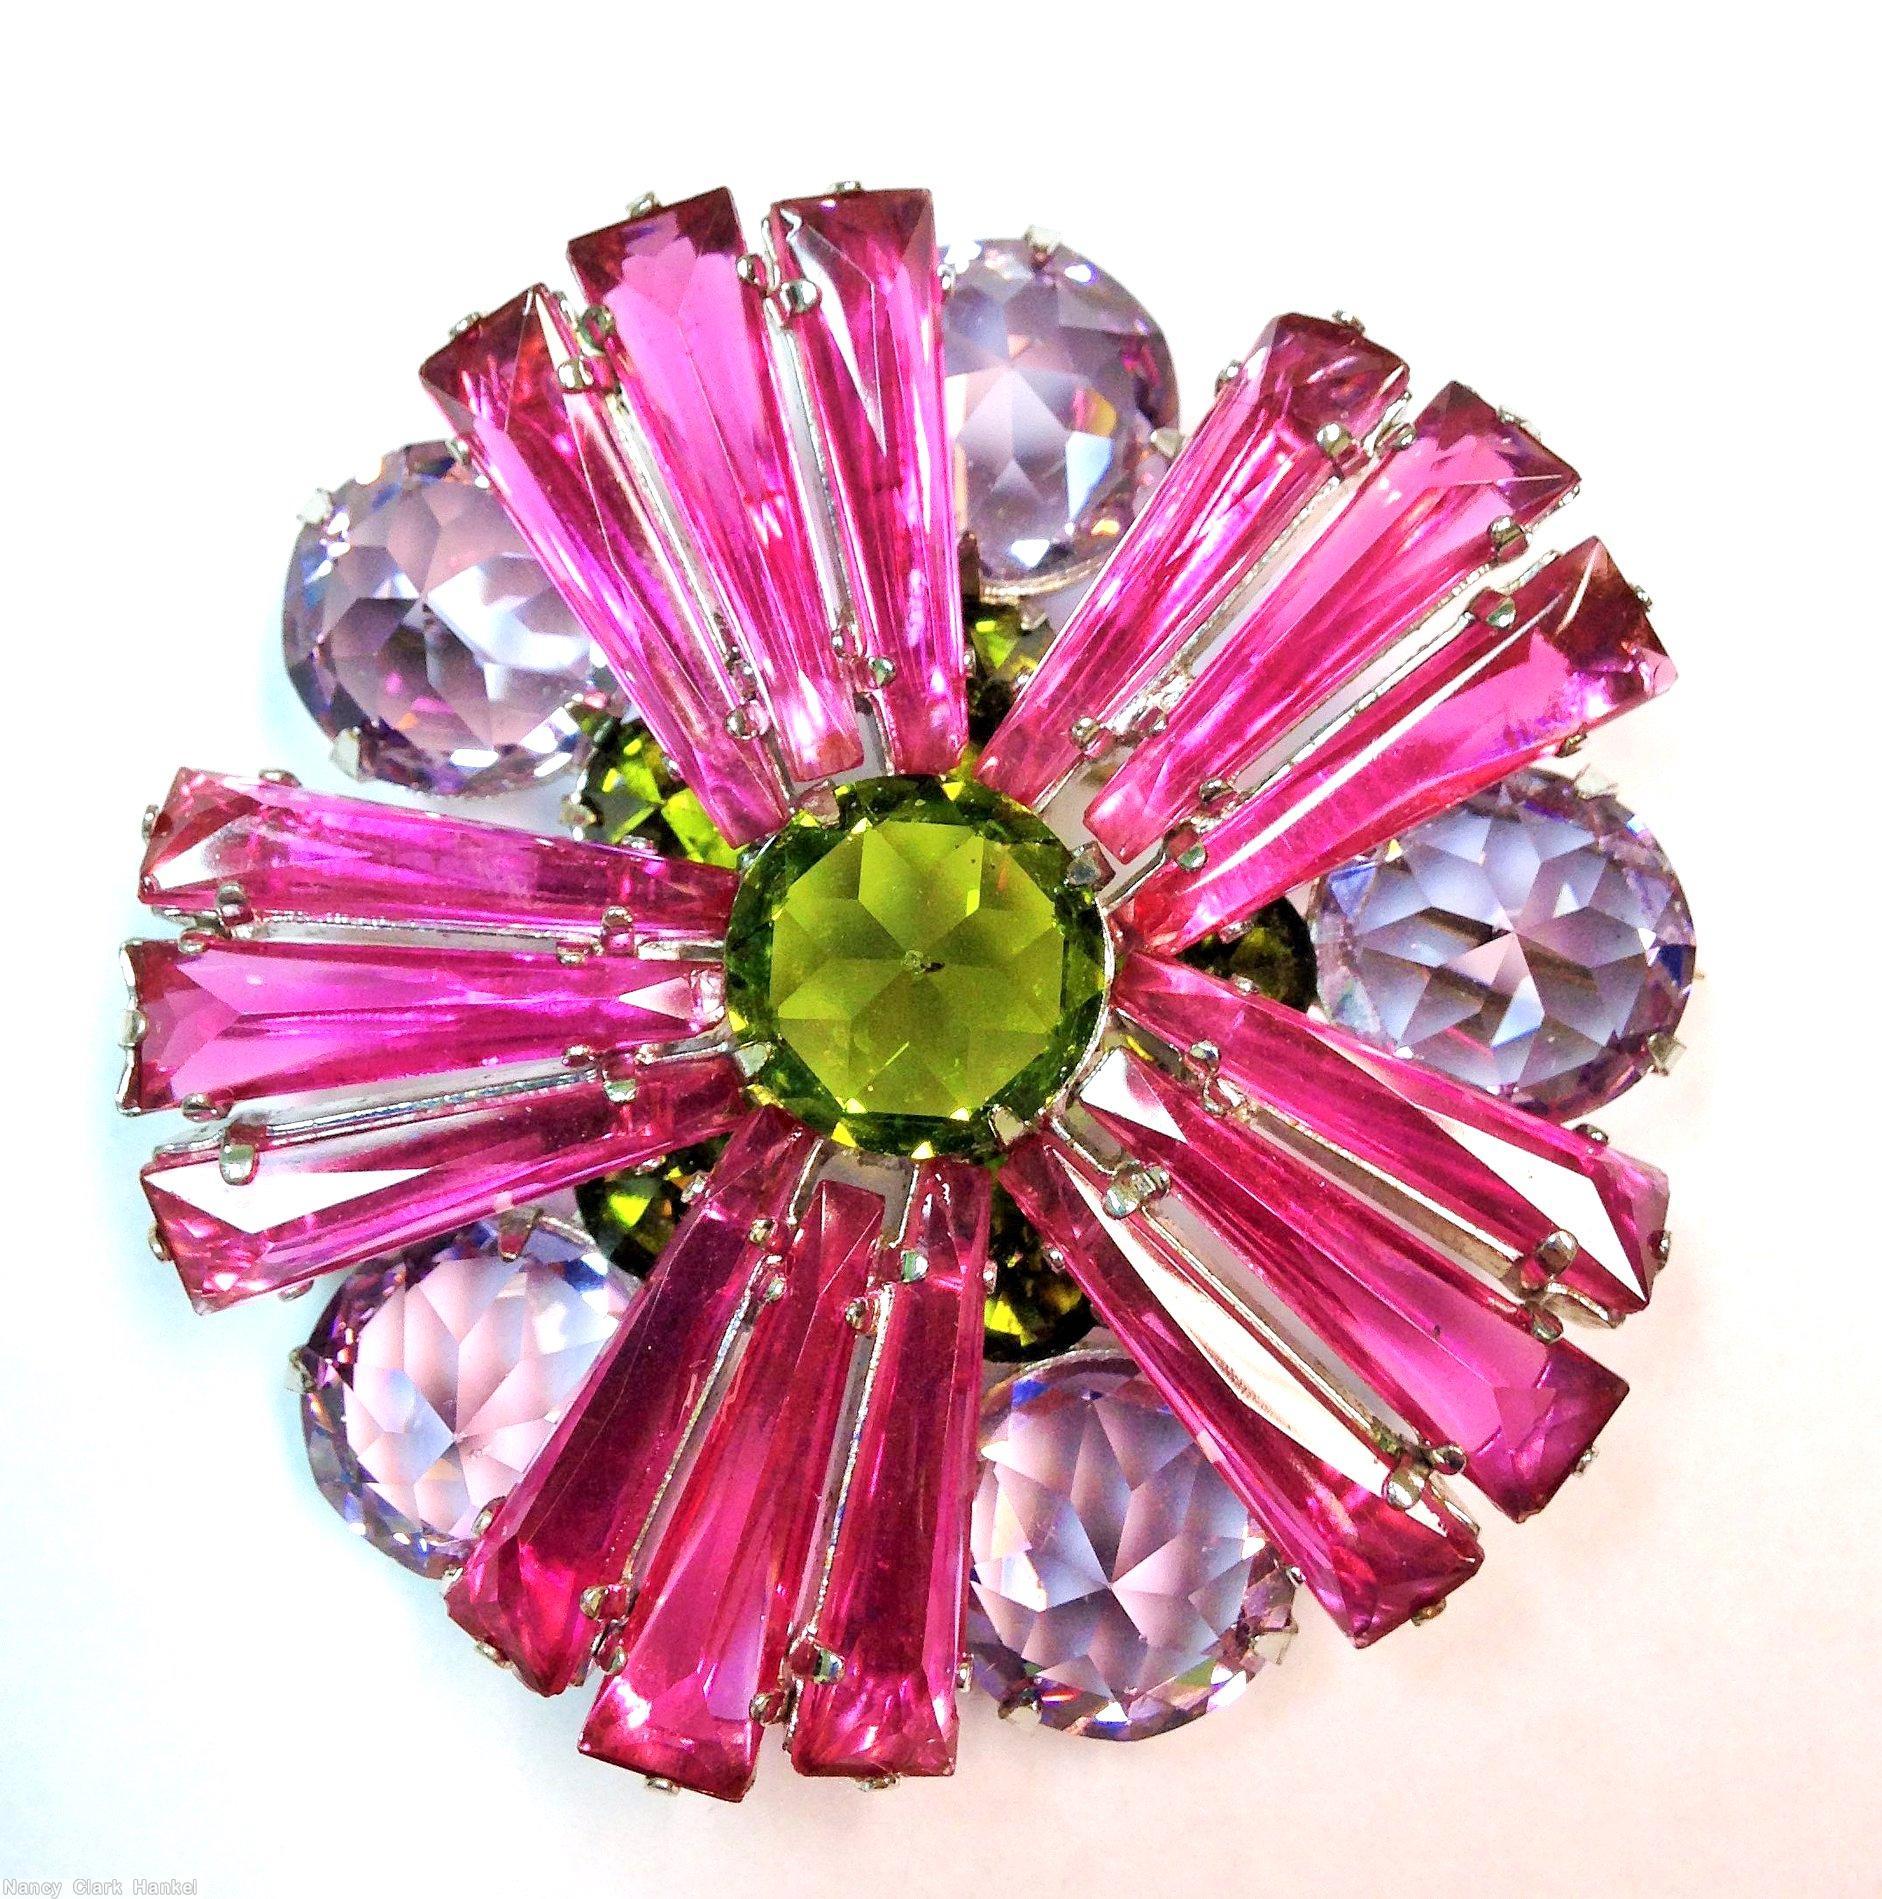 Schreiner 5 group 15 keystone radial ruffle pin large chaton center 5 large chaton 5 small chaton peridot faceted chaton center fuchsia keystone ice lavender faceted chaton jewelry